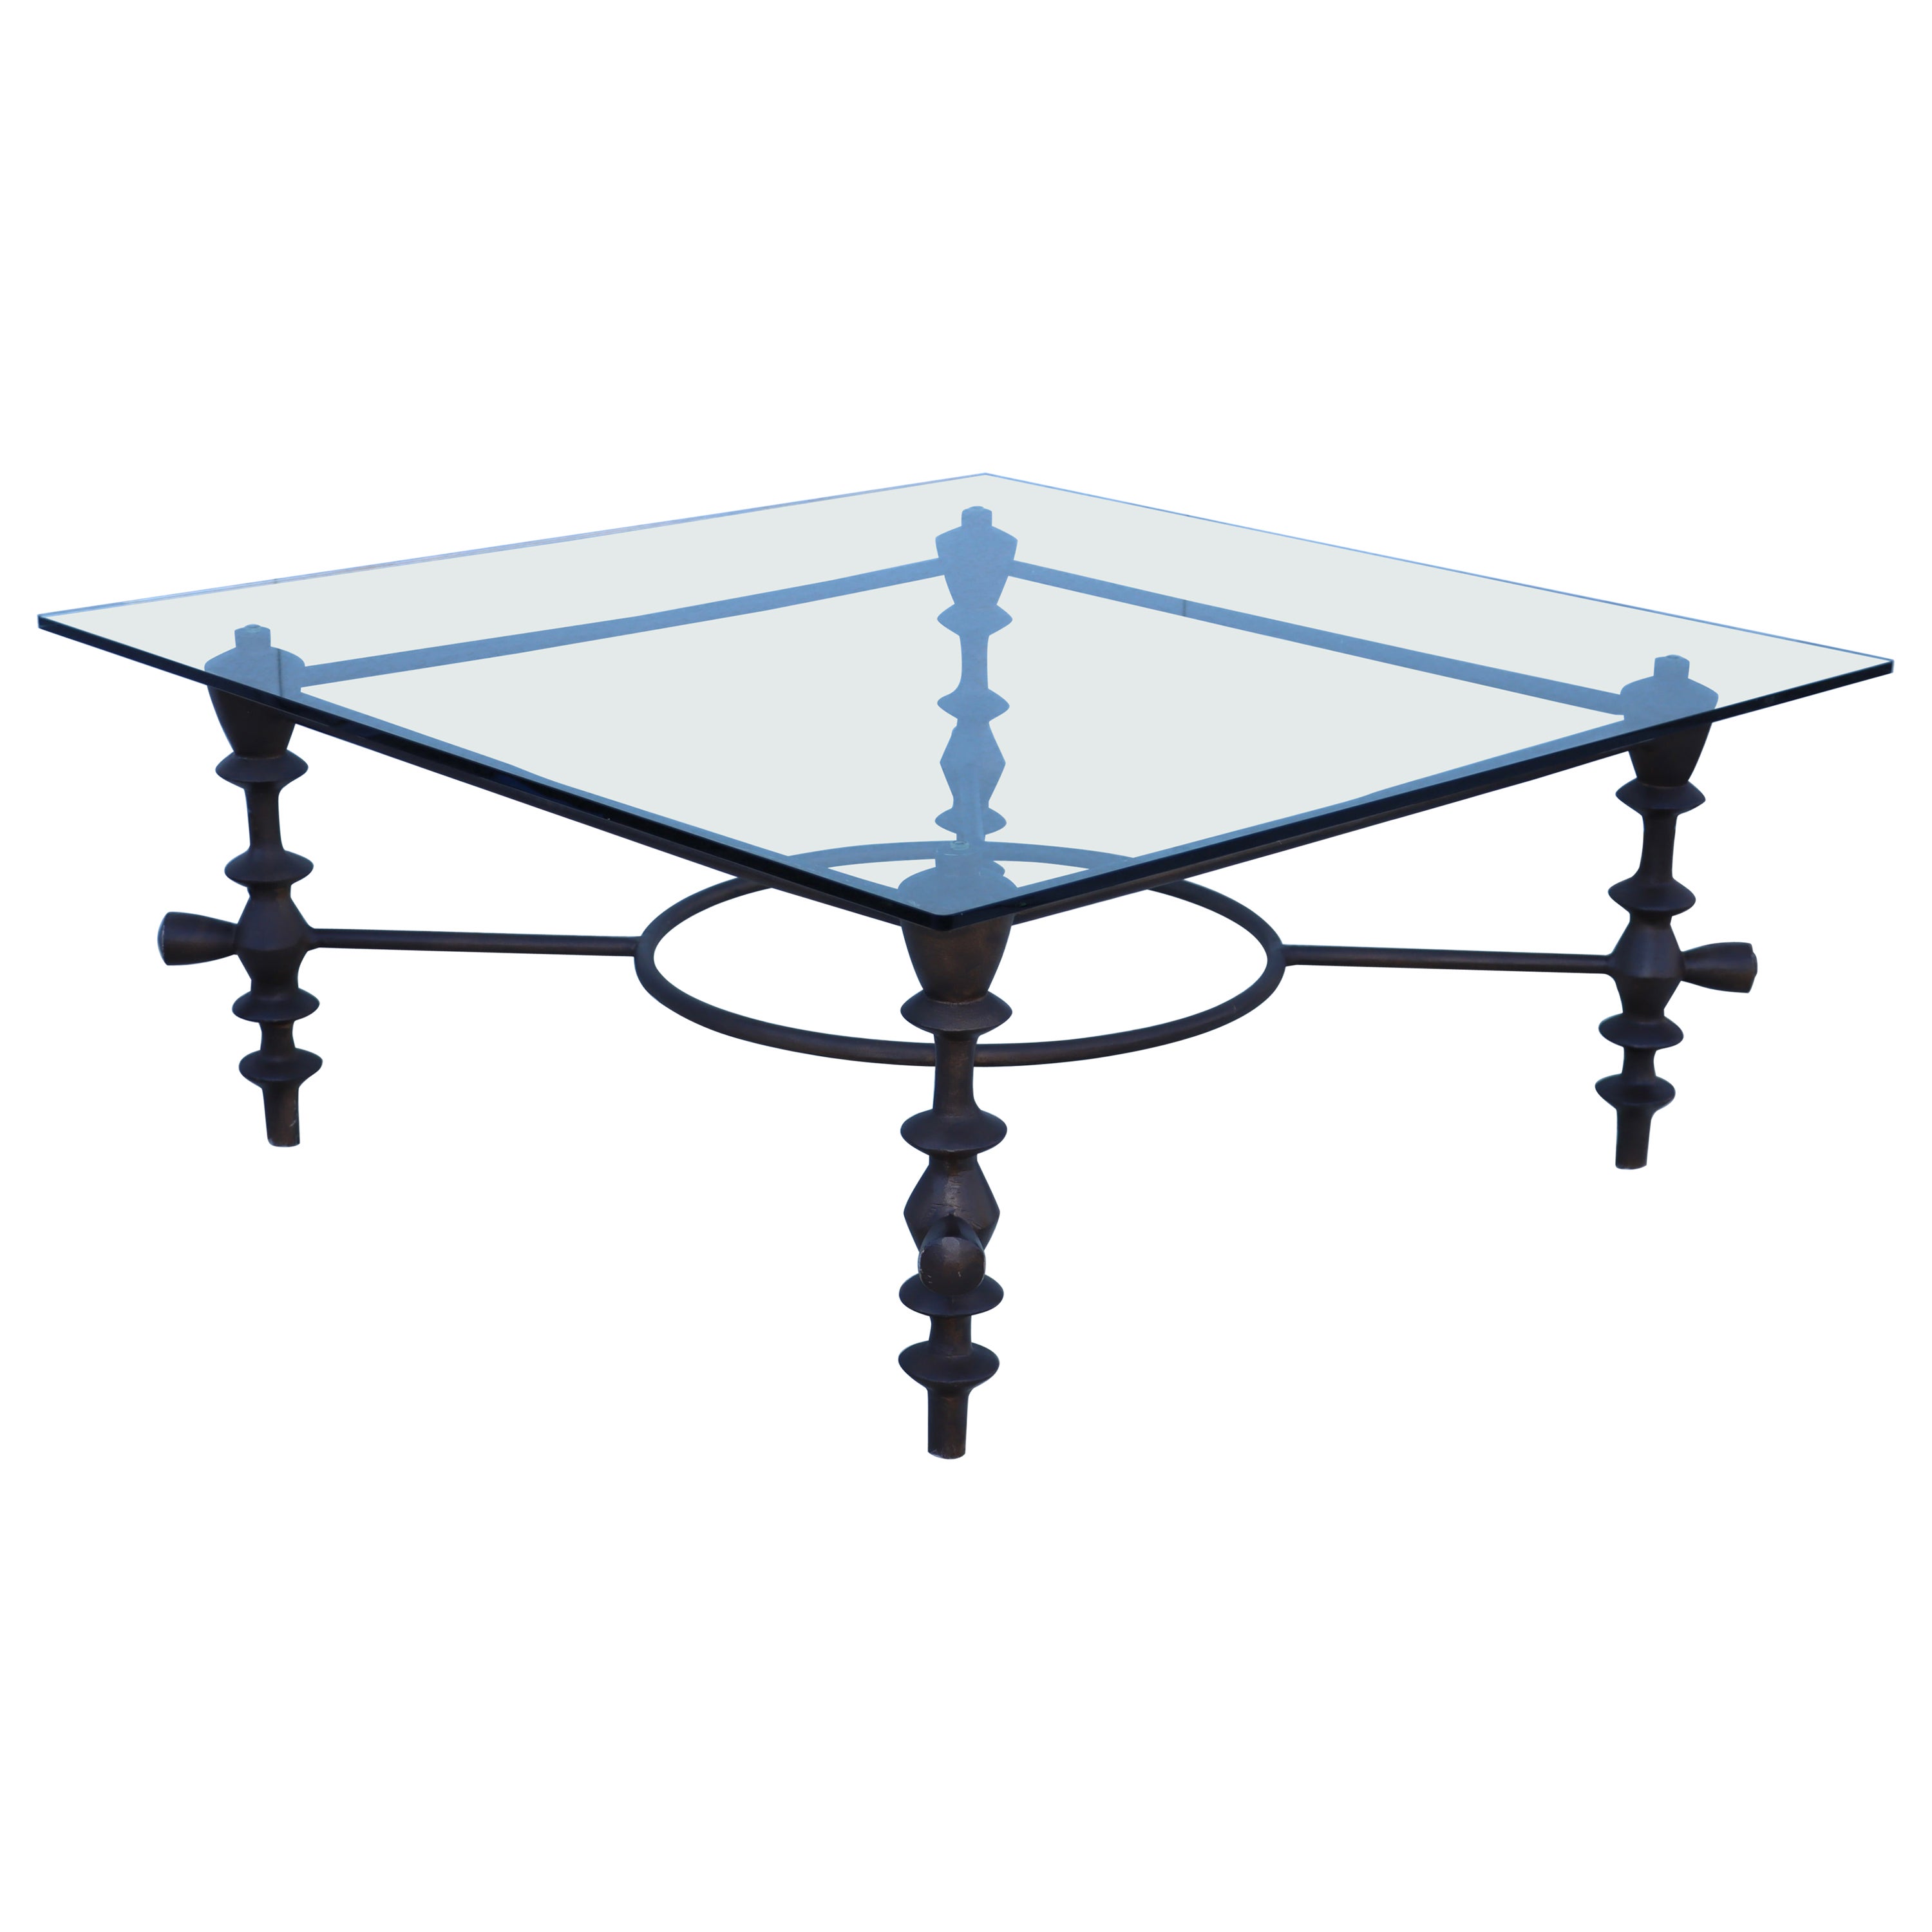 What is the standard size of a card table?